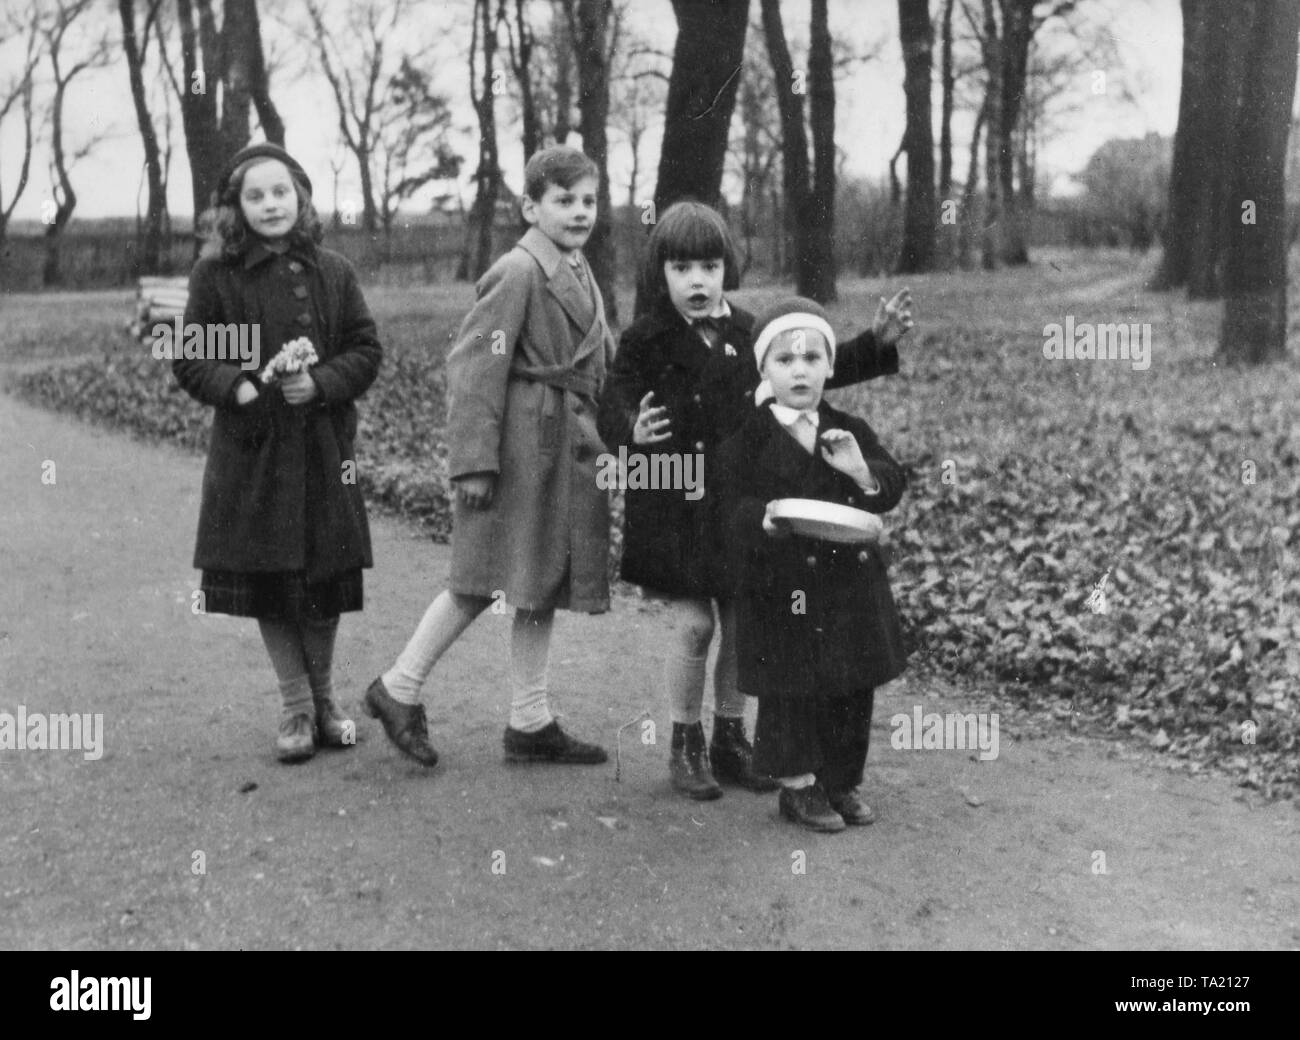 From left to right: the actress Maria Schell, the actor Maximilian Schell, Immy Schell and Carl Schell, the mid 1930s Stock Photo